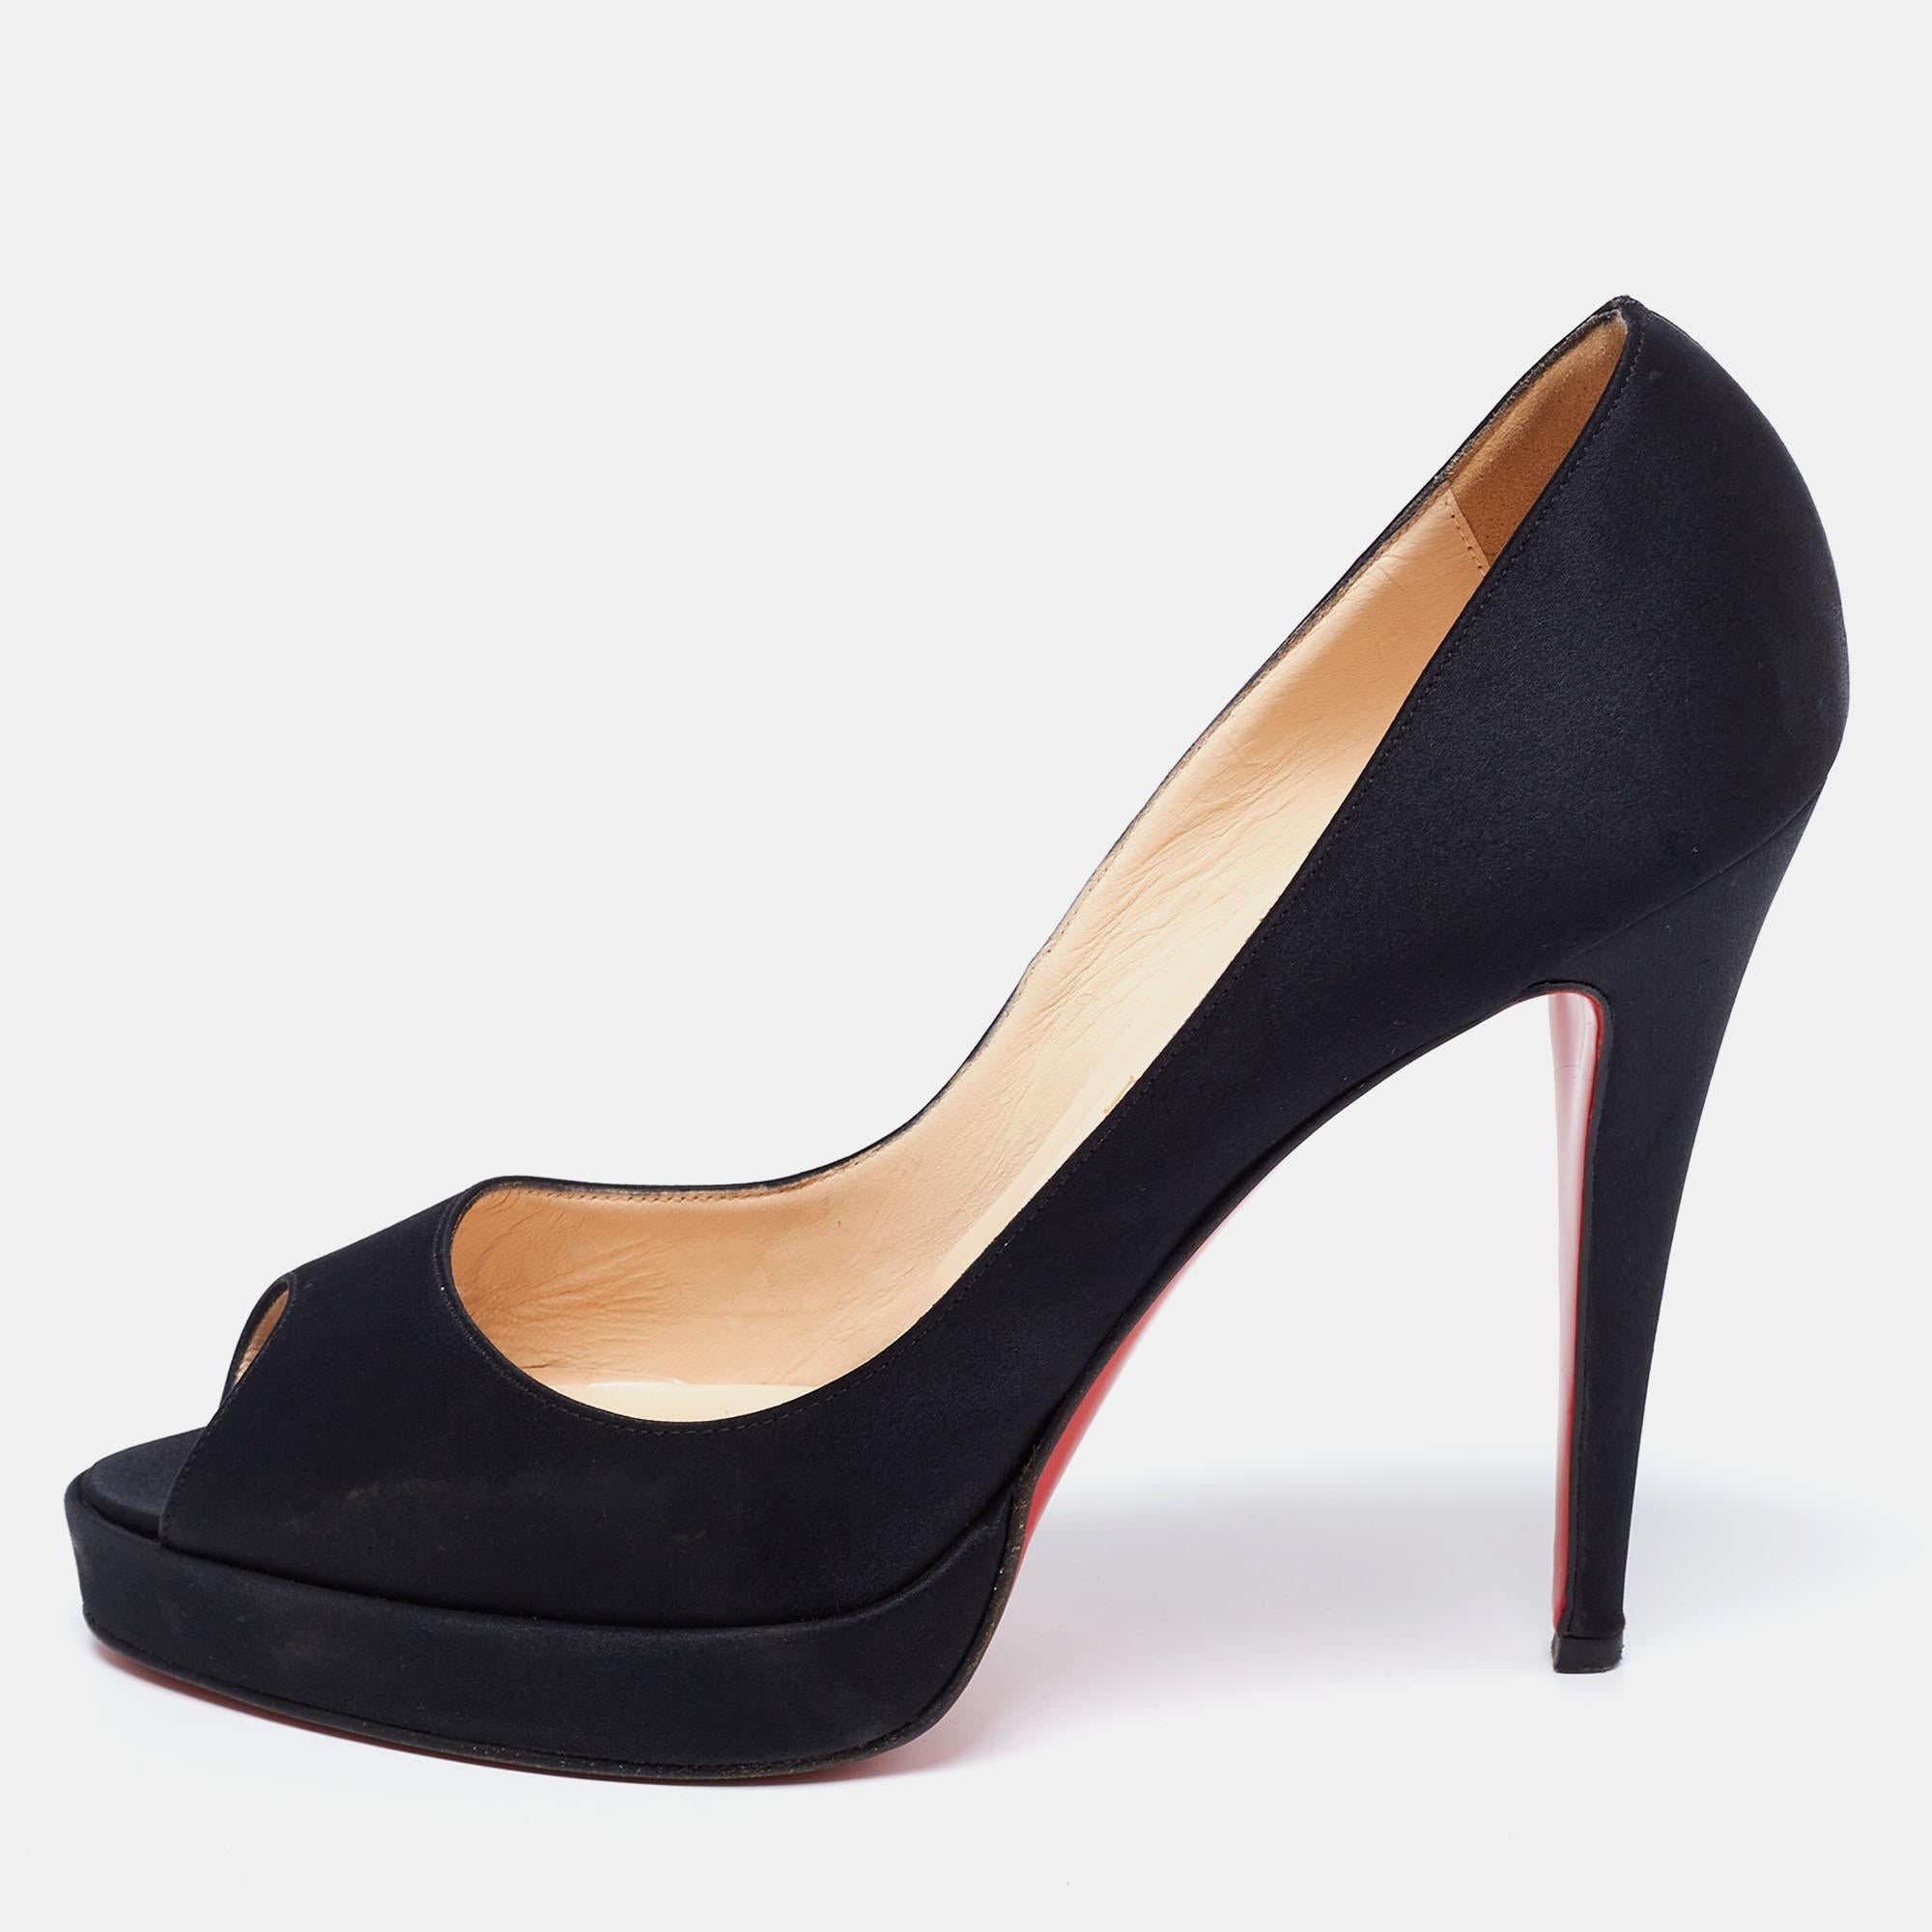 Walk smoothly and with style by adorning this pair of Christian Louboutin pumps. Perfect for several occasions, the pair comes made from satin into a peep-toe silhouette with signature red-lacquered soles. The 12.5cm heels and platforms make it a